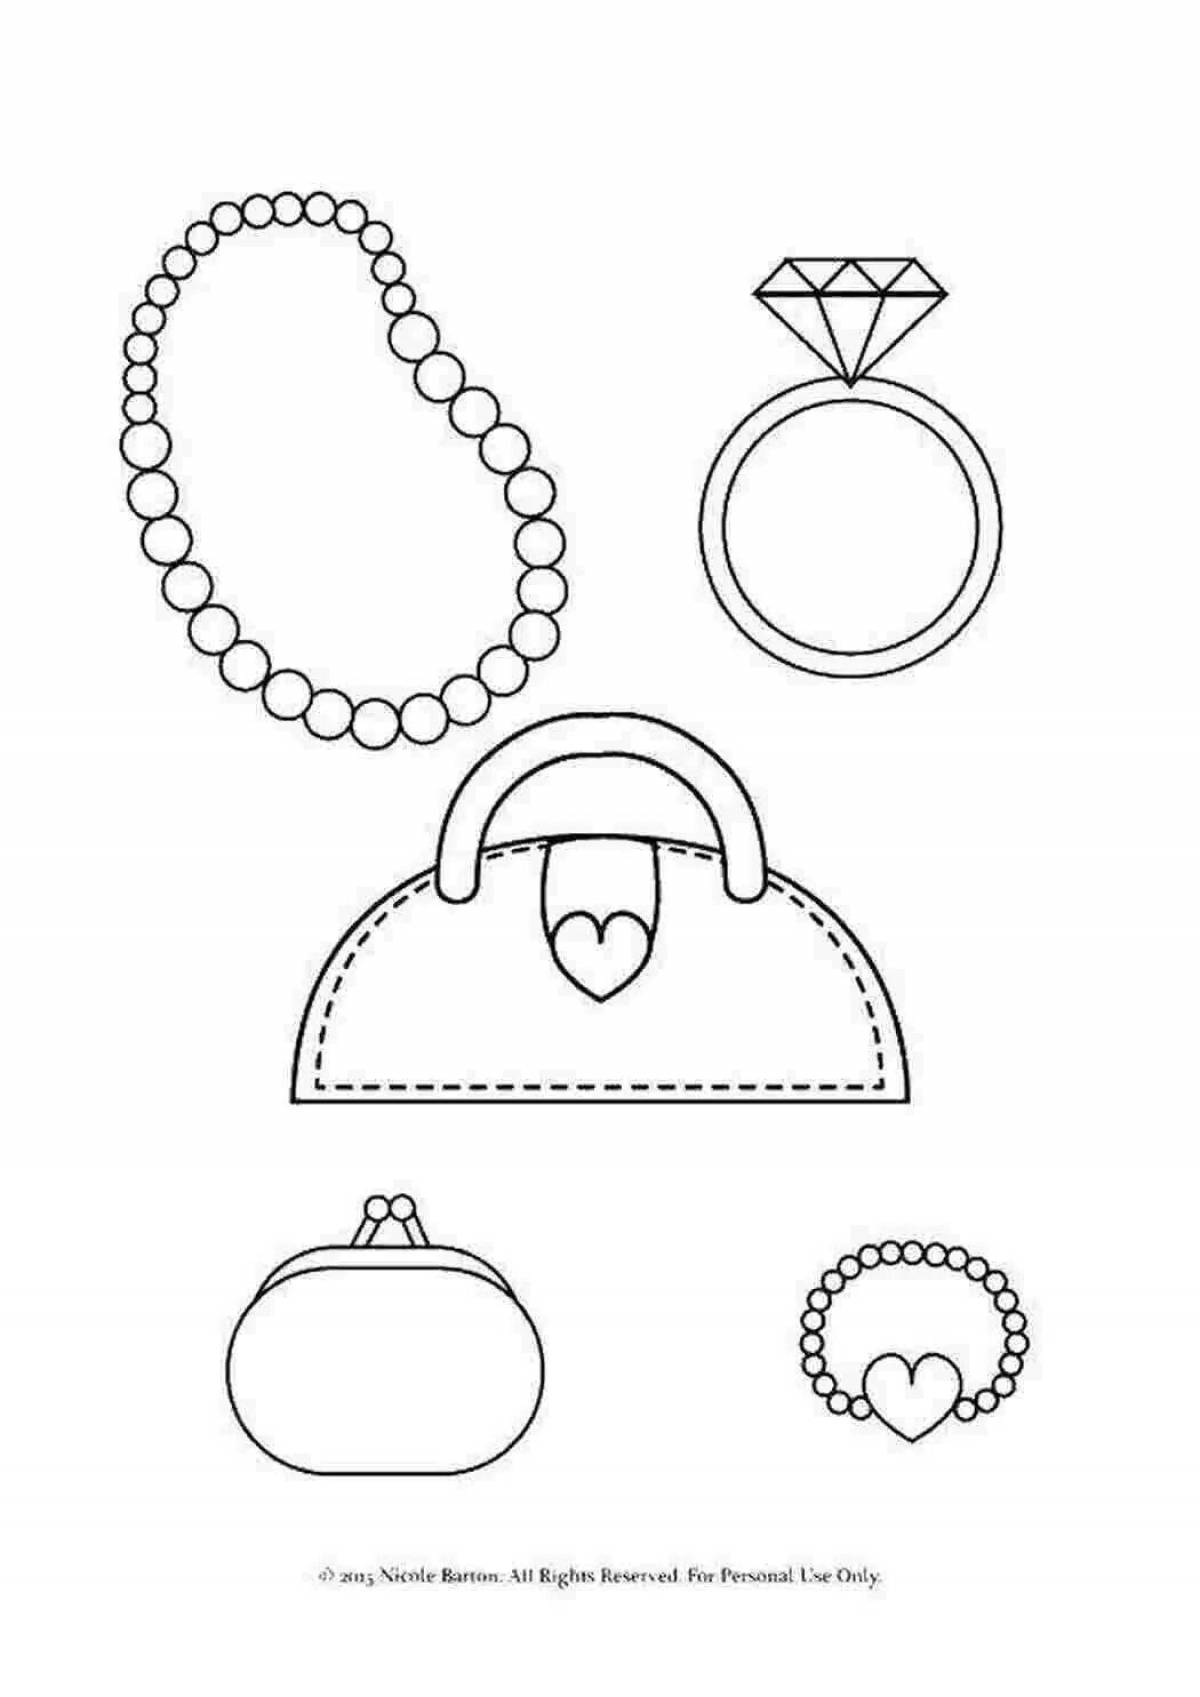 Coloring book shiny jewelry